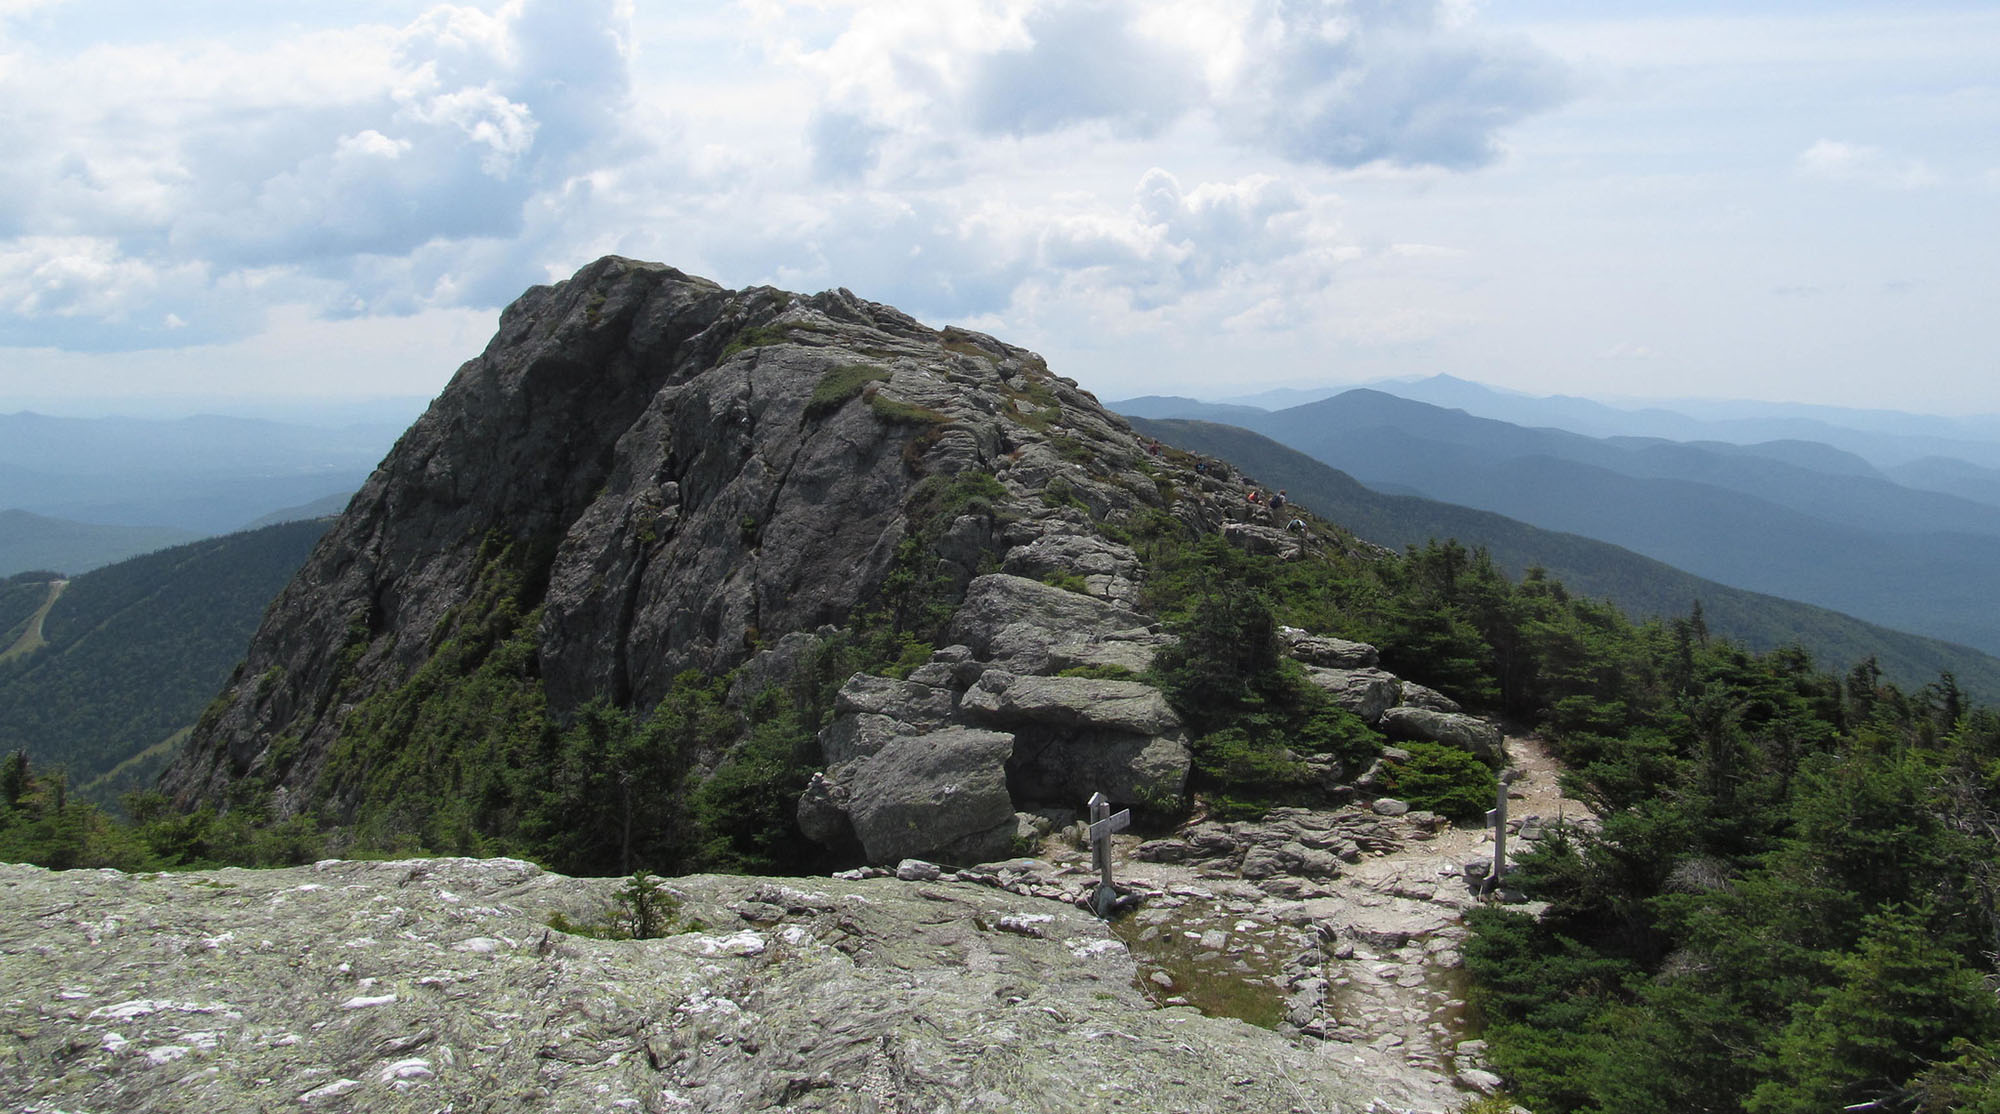 Photo of the rocky peak of Mount Mansfield in Vermont.